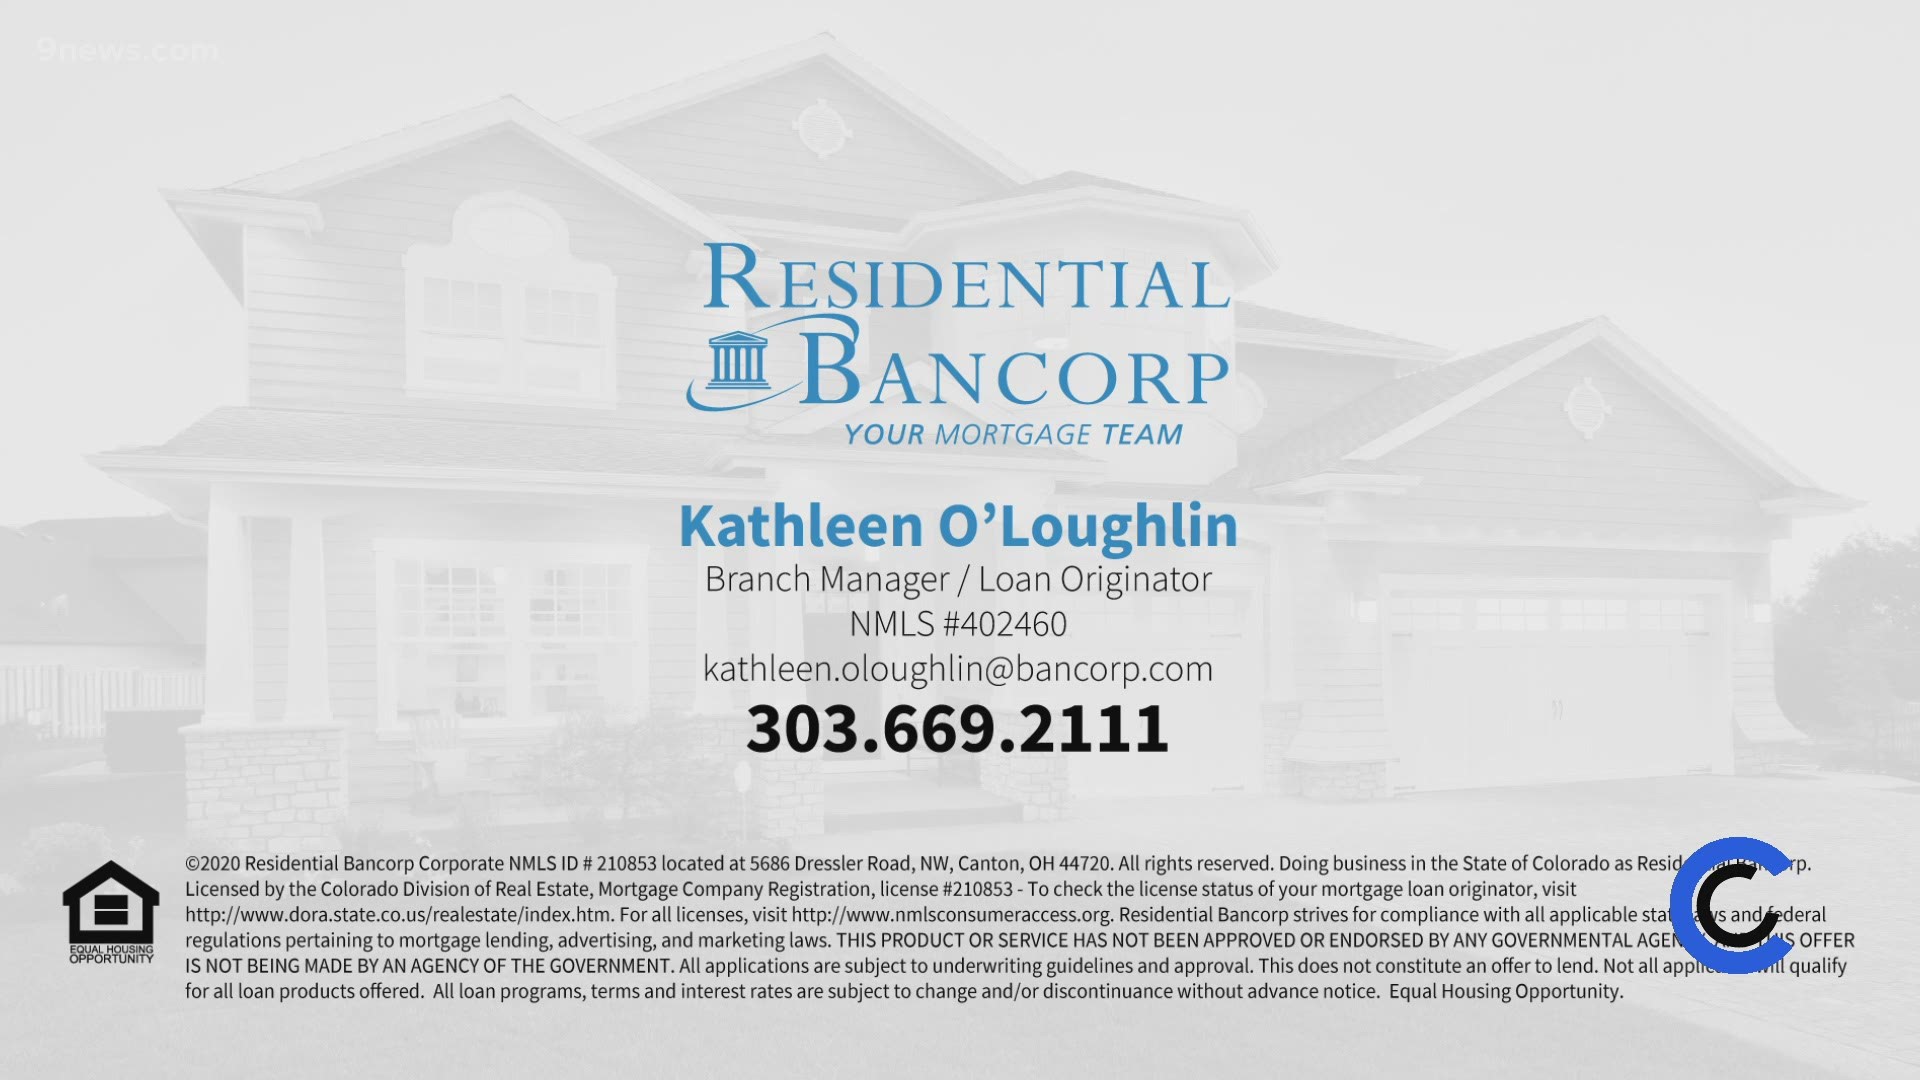 Call Kathleen at 303.669.2111 or visit KOHomeLoans.com to get started with Residential Bancorp.